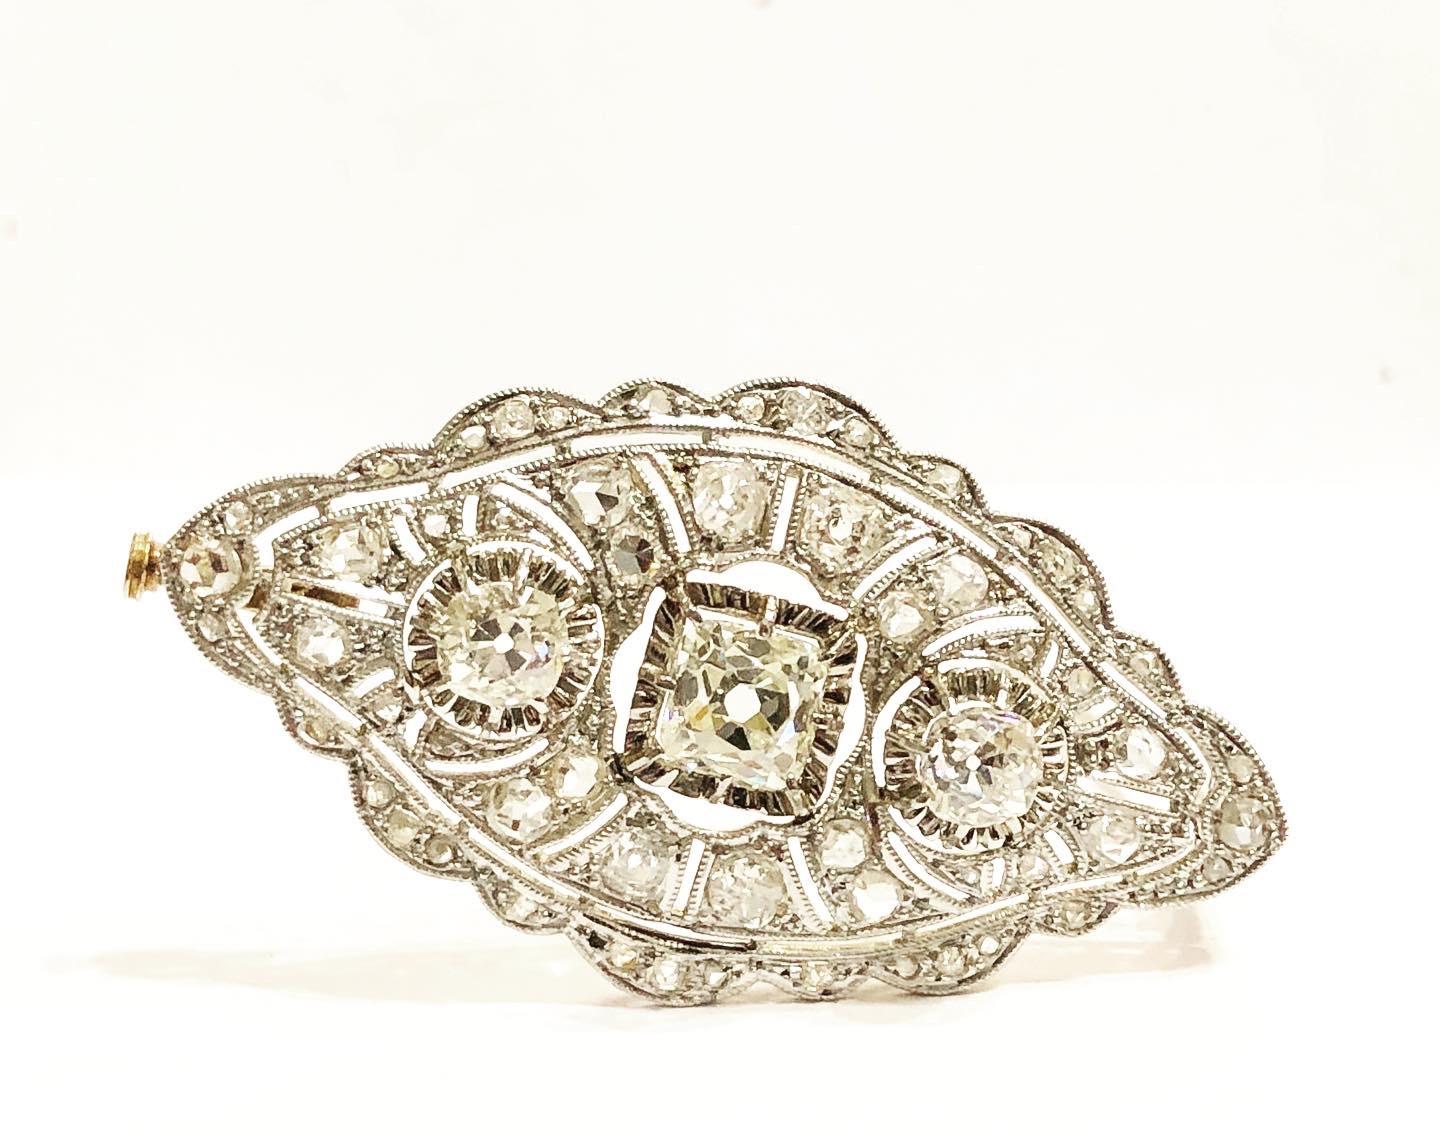 Antique 1900's oval diamond, platinum 18 karat yellow gold brooch.
This stunning, fine and impressive diamond brooch has been crafted in platinum and gold.
Pierced decorated, oval shaped brooch is ornamented with Old European round cut